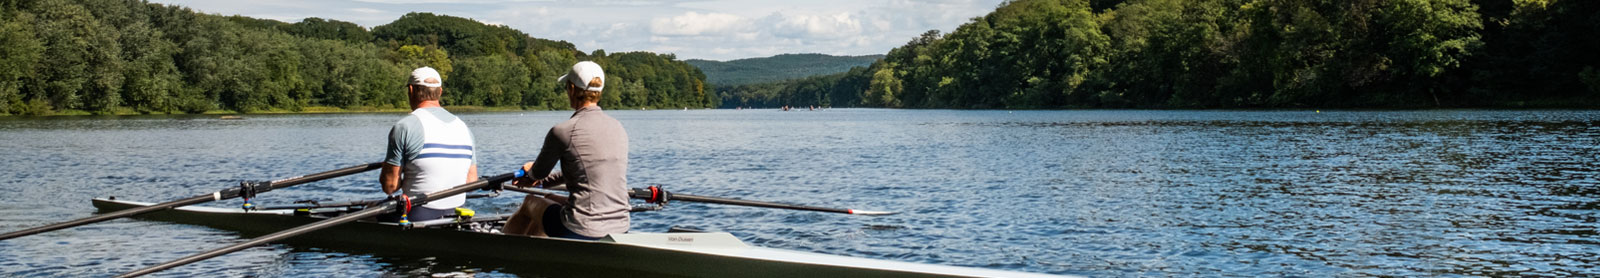 scenic photo of two men rowing small boat on lake with mountains in background